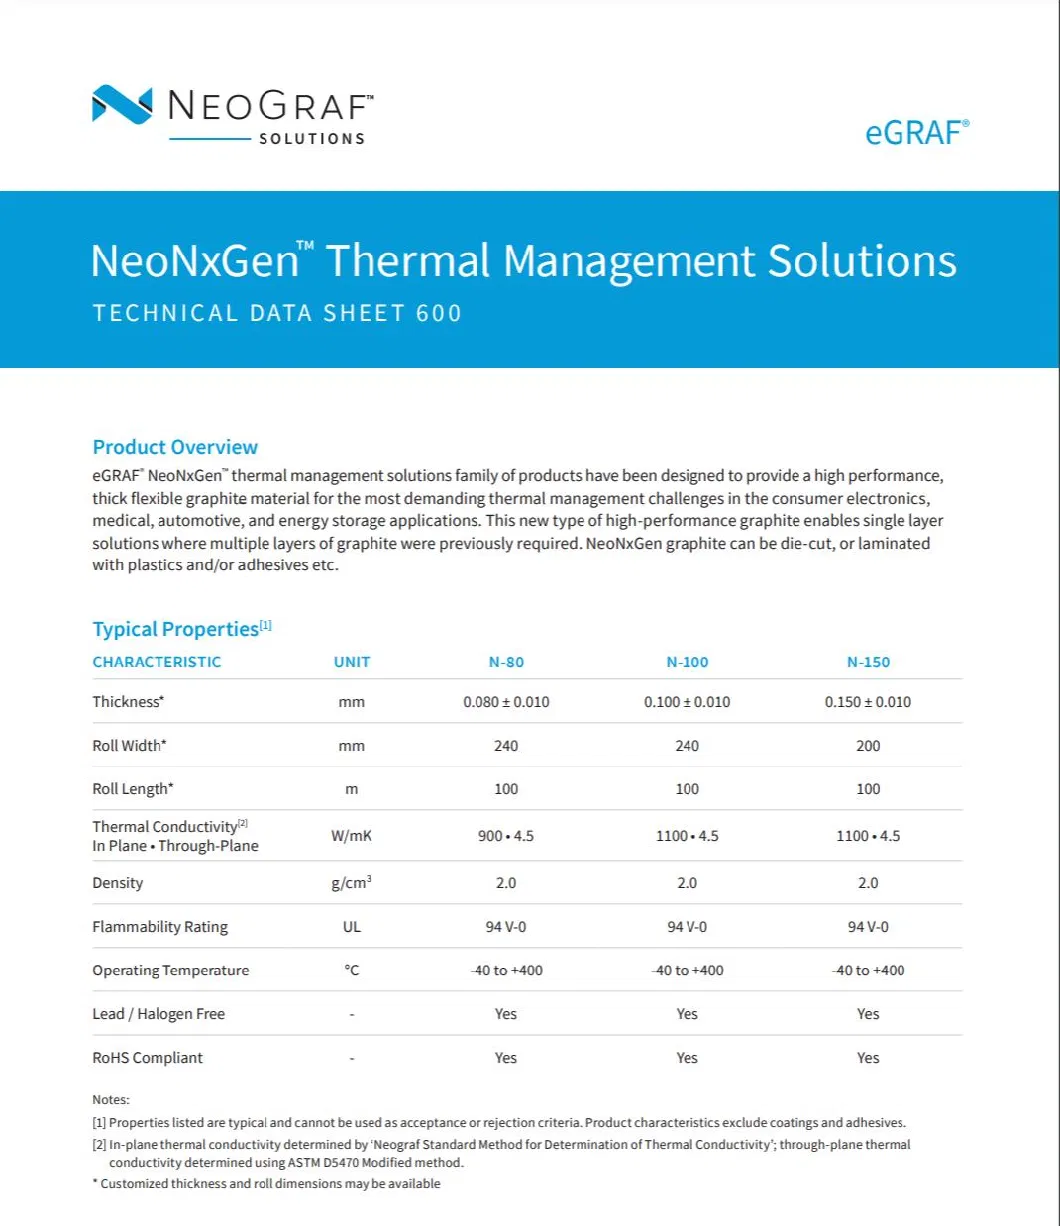 Egraf Neonxgen Thermal Management Solutions N Series Single-Layer Graphite Sheet for The Consumer Electronics Medical Automotive and Energy Storage Applications